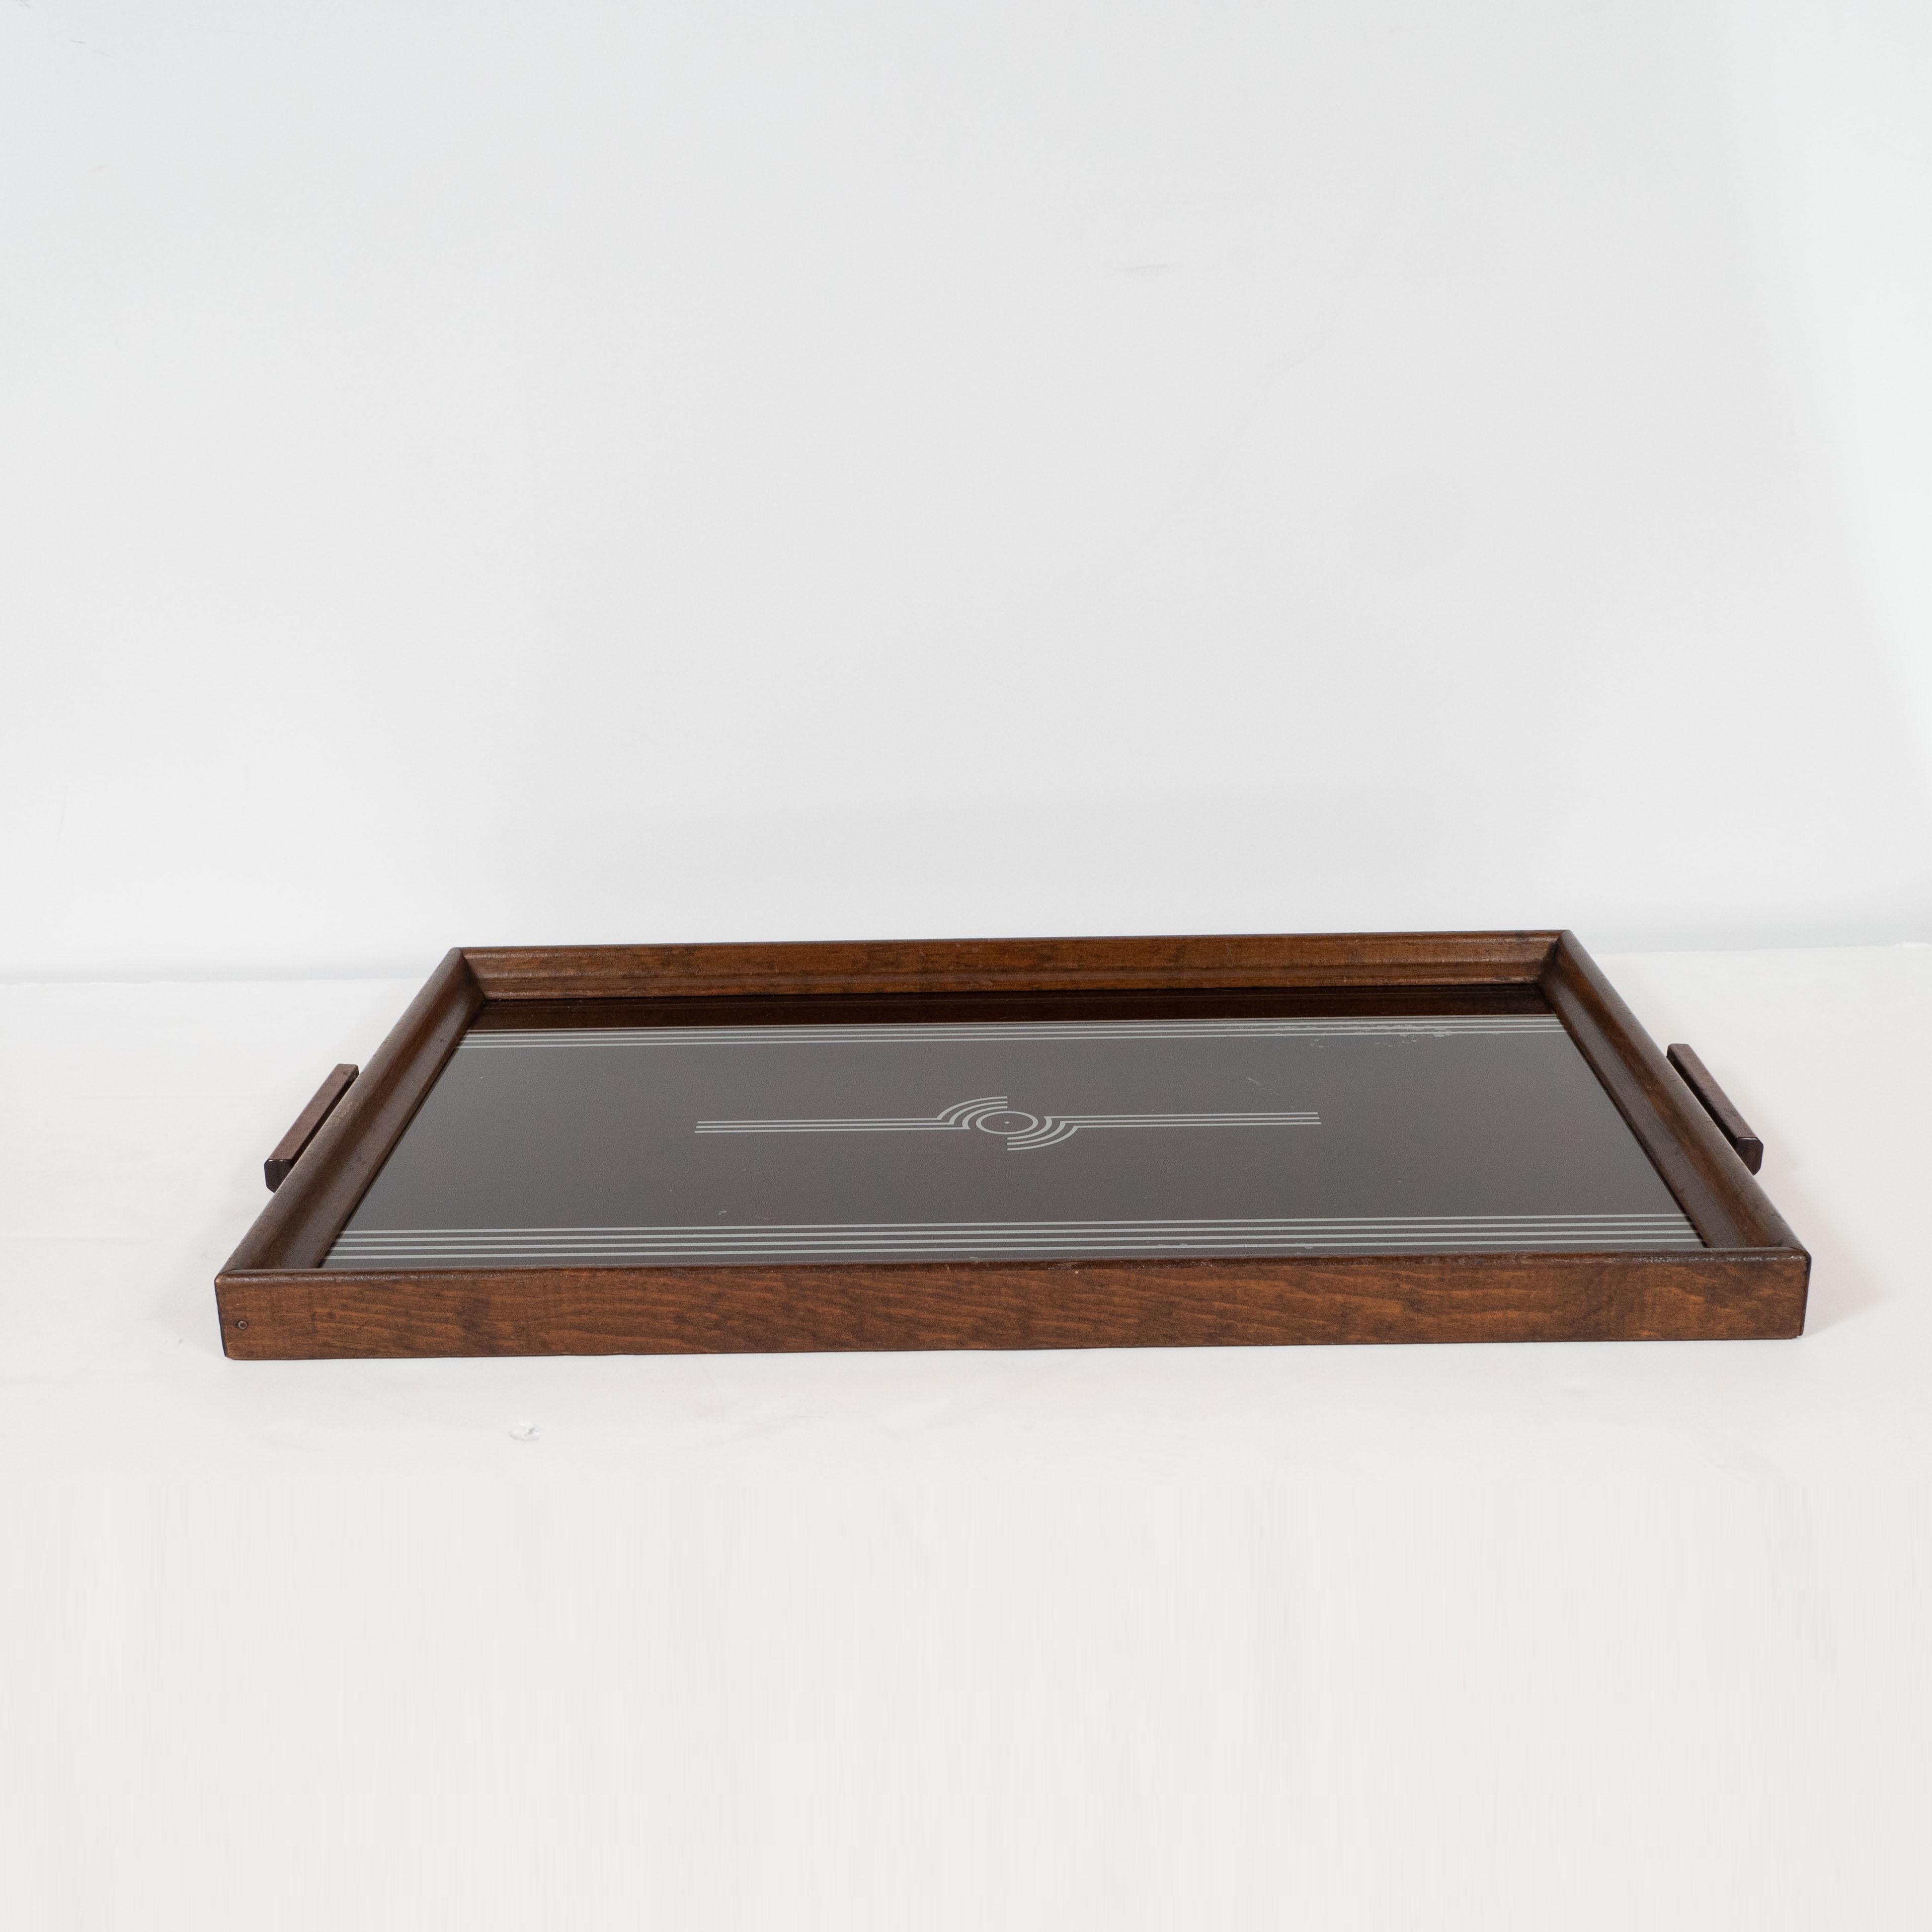 This elegant tray features glass hand painted geometric streamlined designs in sterling silver over an ebonized walnut body. The perimeter body has been executed in hand rubbed walnut with pentagonal handles of the same material. This is a beautiful